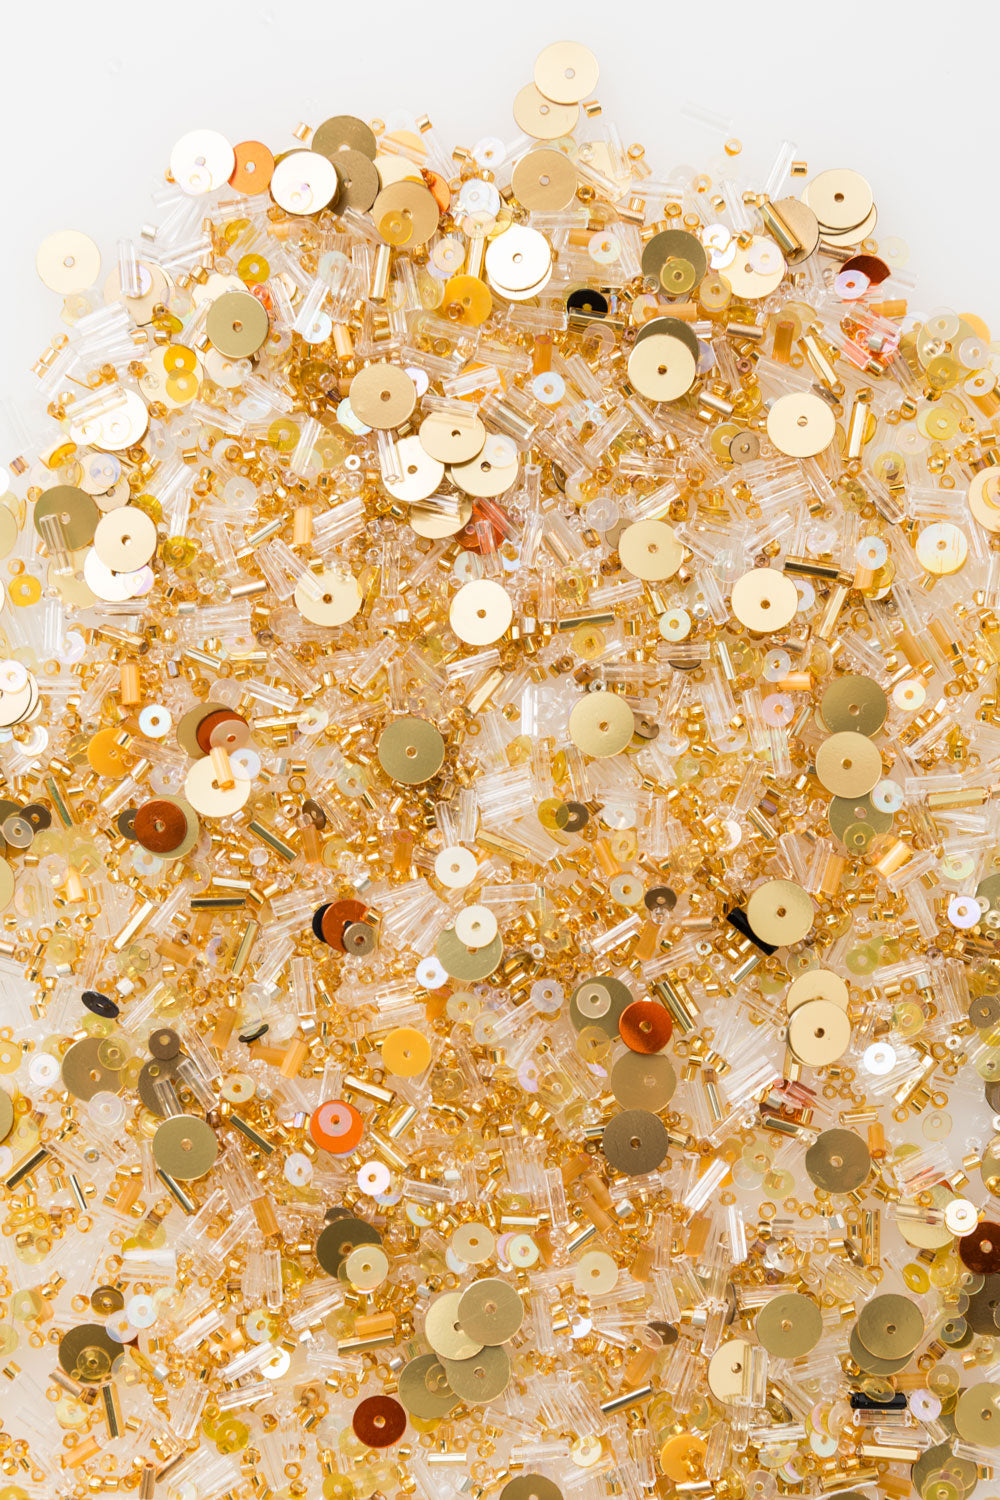 Gold Bomb bead mix featuring beads and sequins in gold and clear glass.